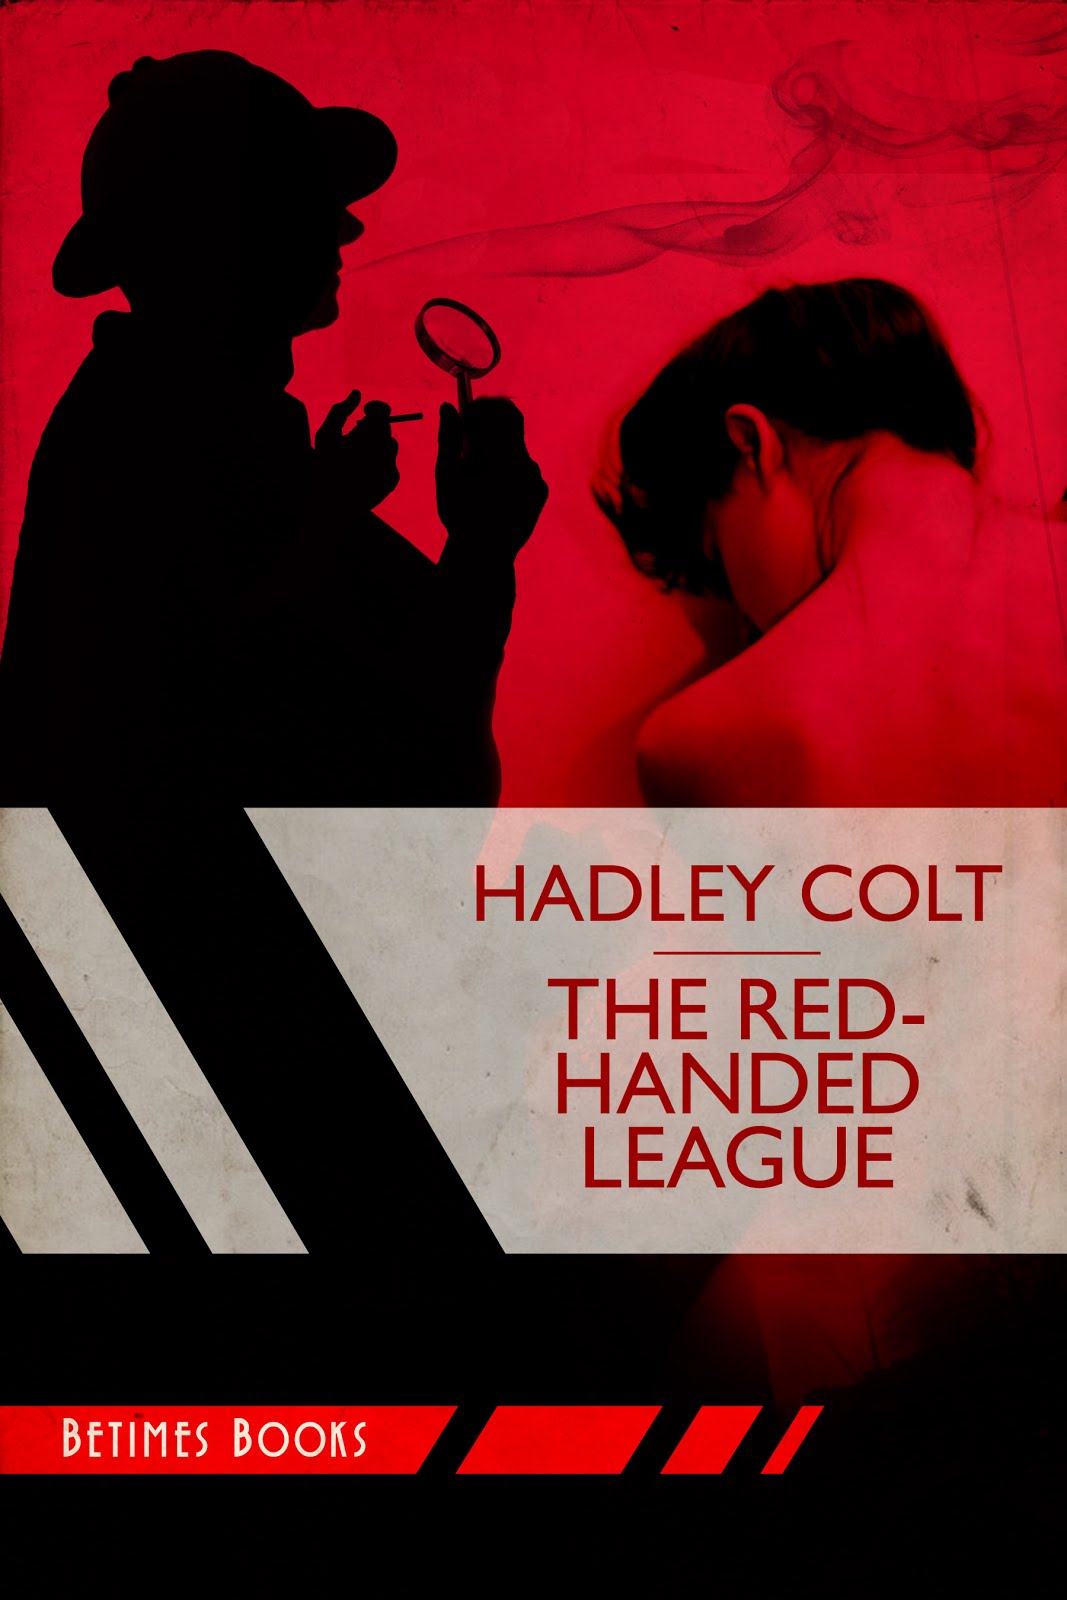 THE RED-HANDED LEAGUE